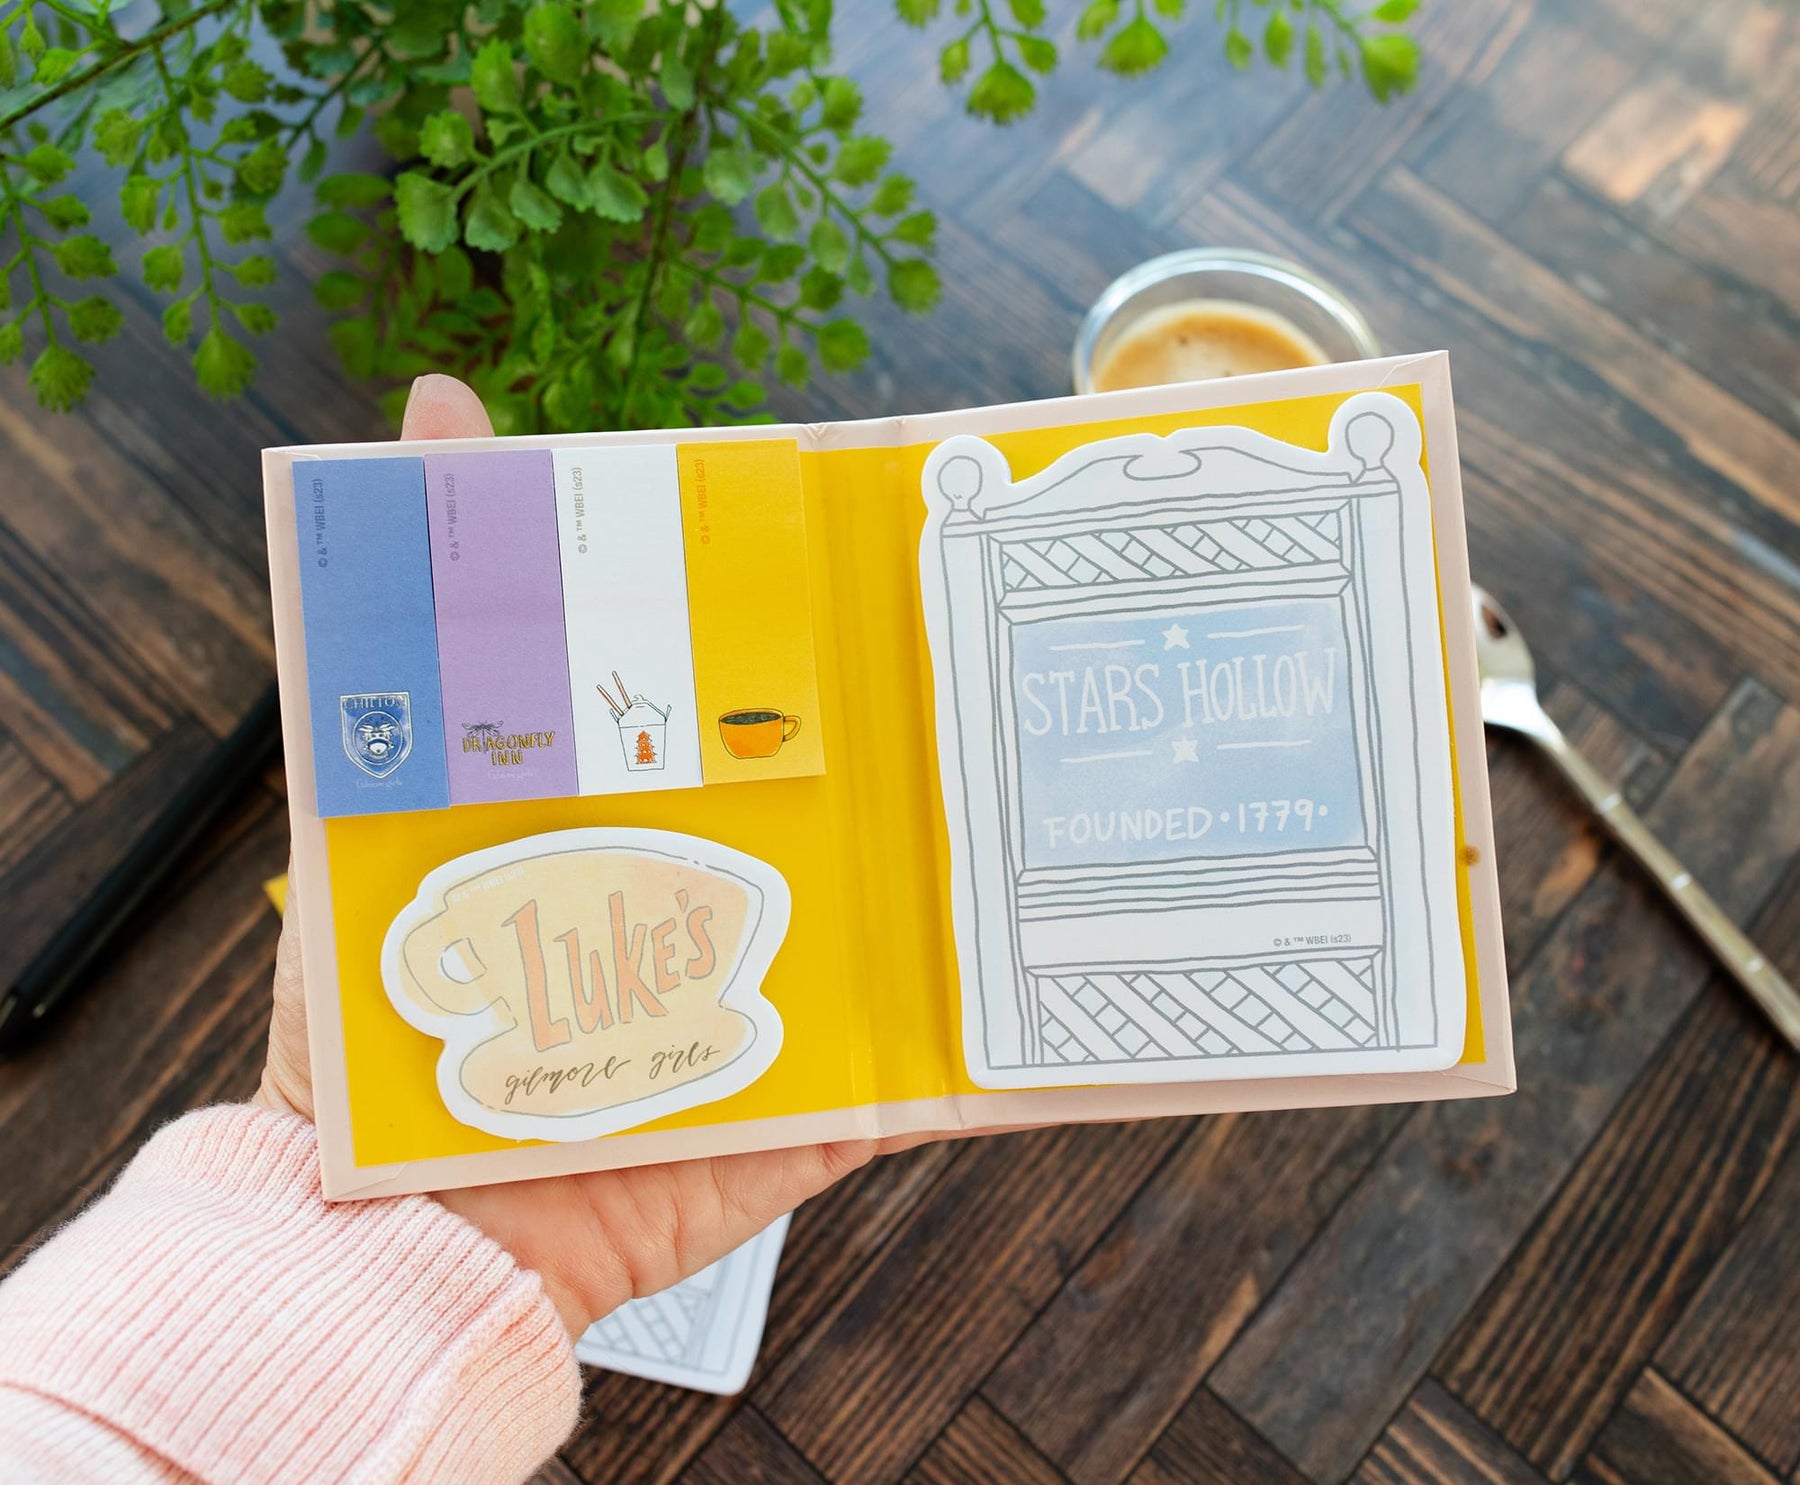 Gilmore Girls "Life's Short, Talk Fast" Sticky Note and Tab Box Set